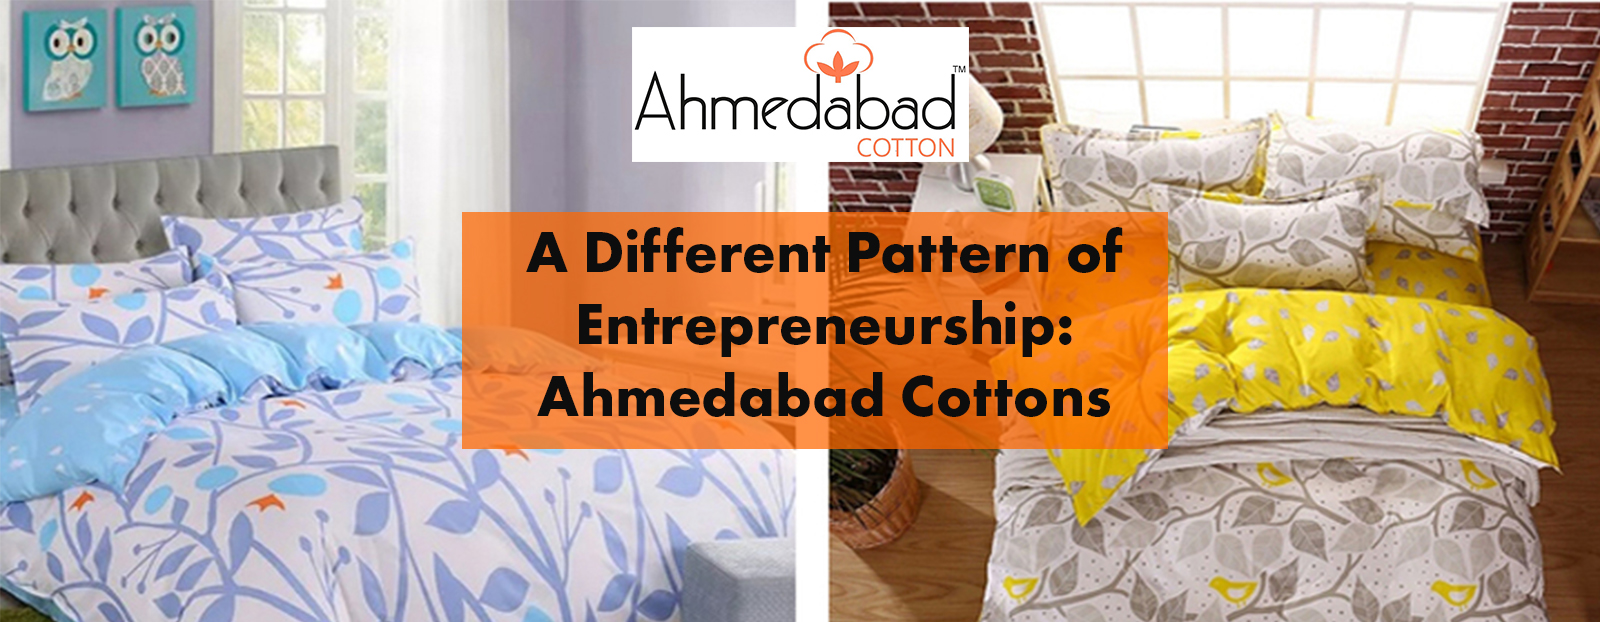 A Different Pattern of Entrepreneurship: Ahmedabad Cottons